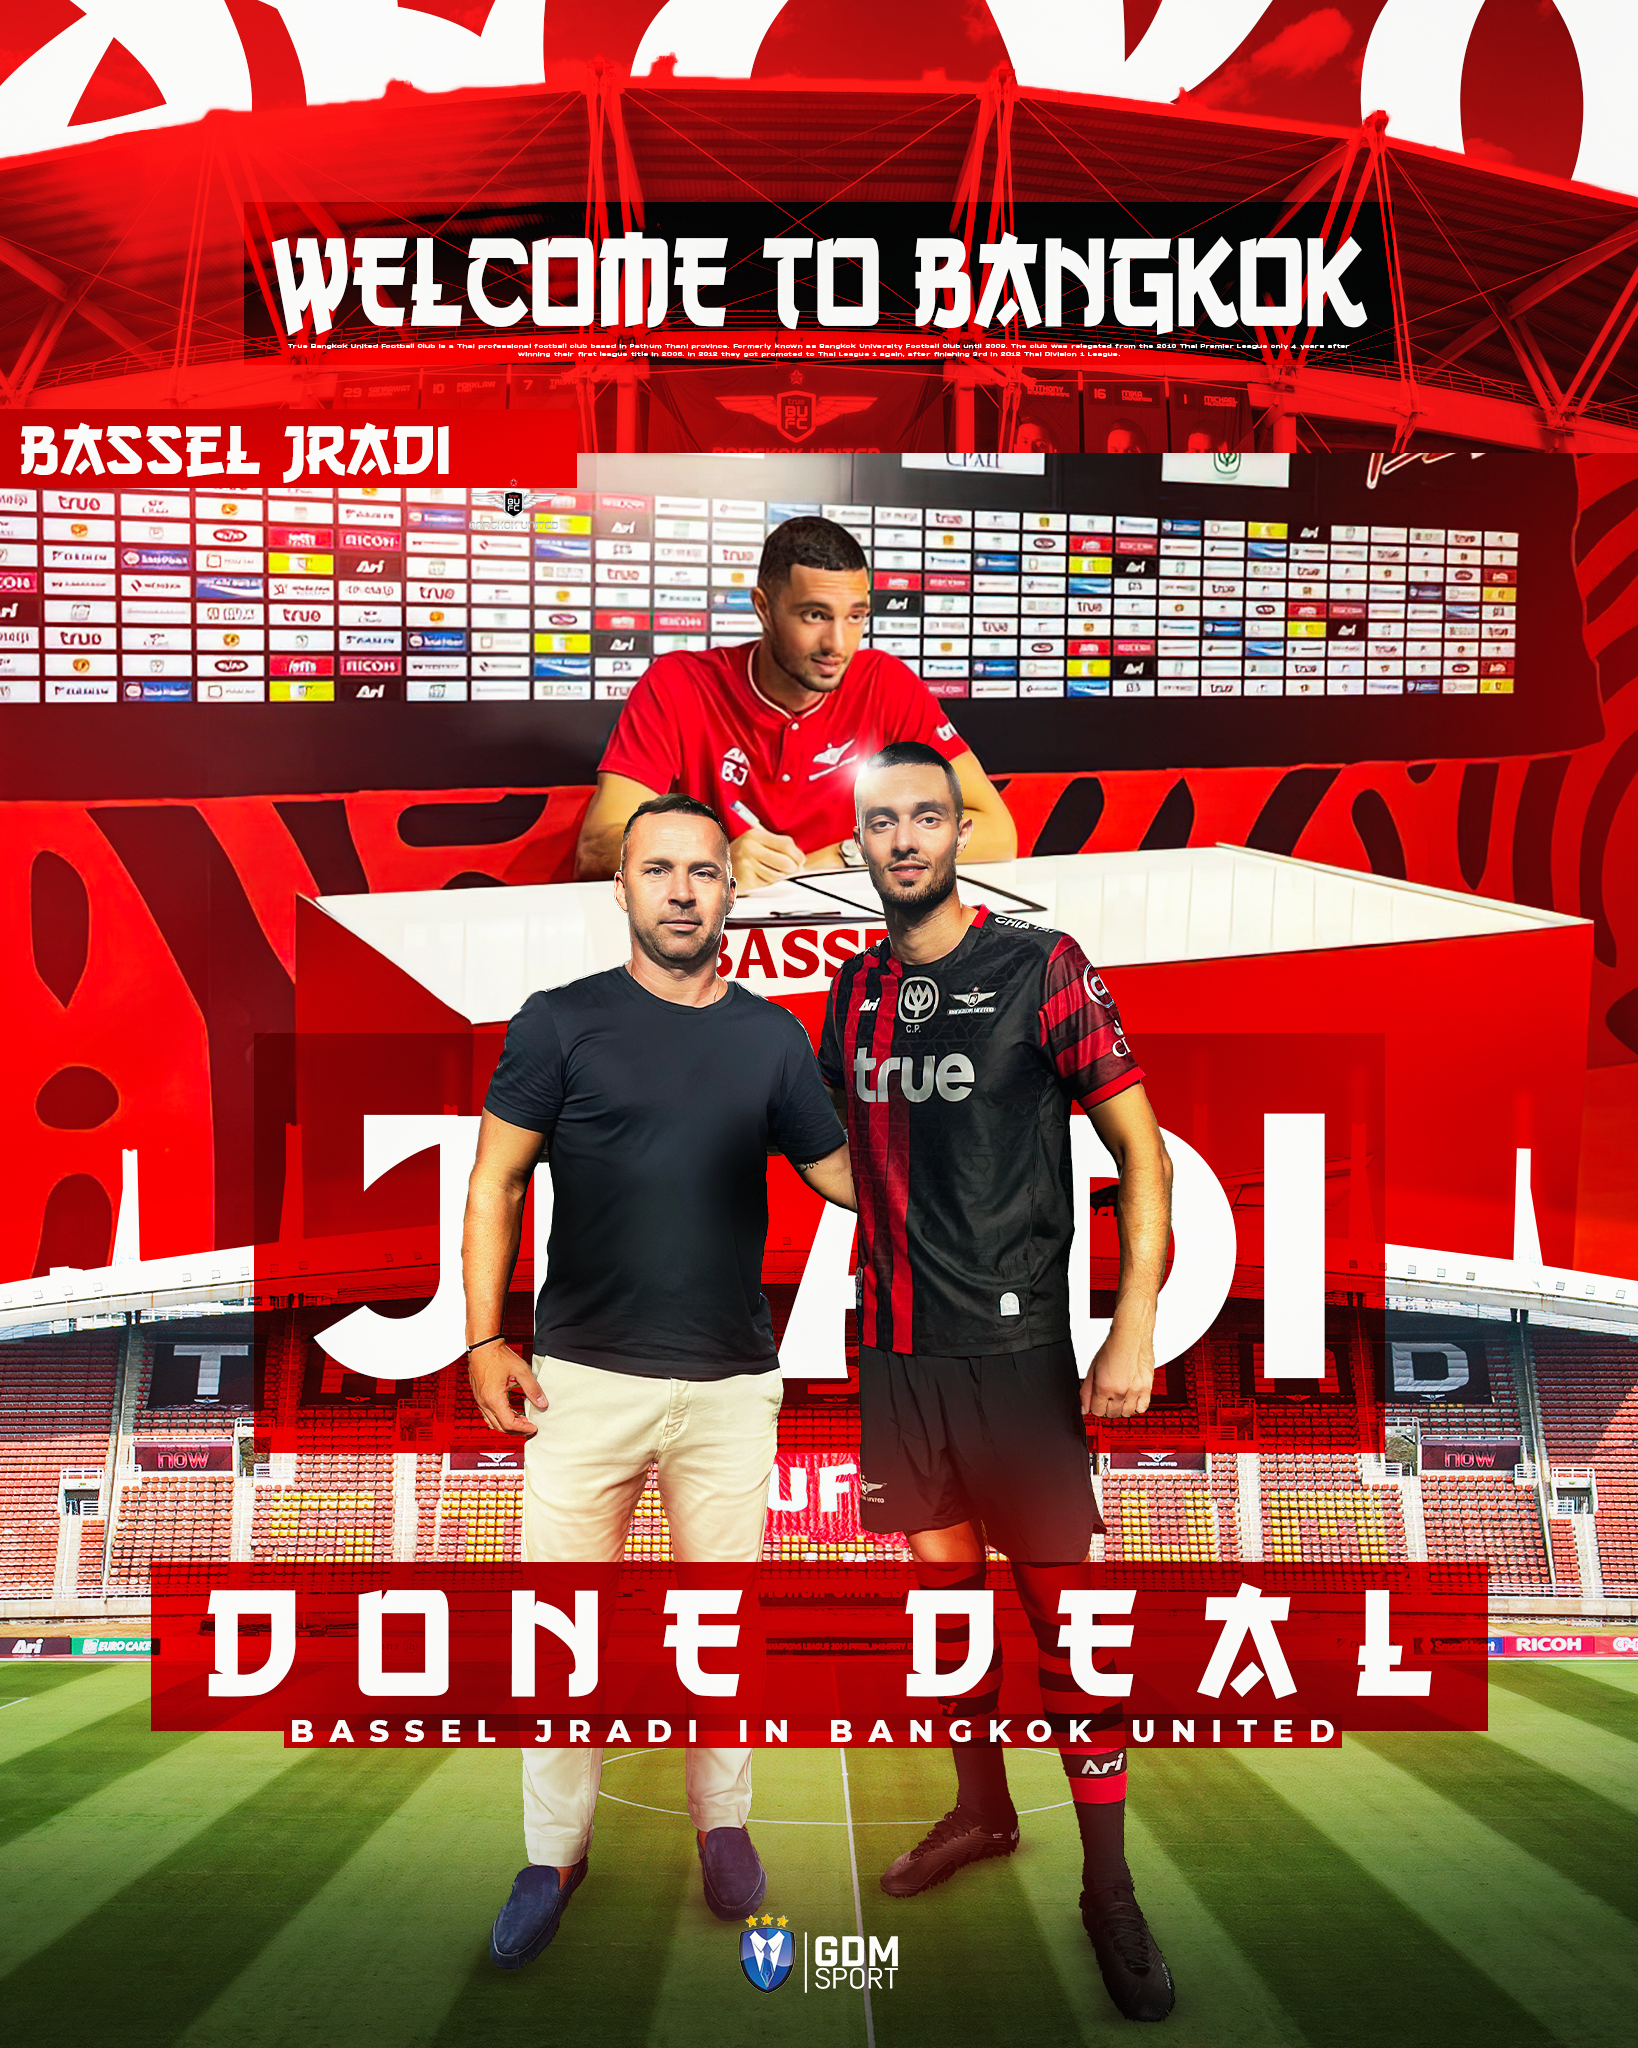 Read more about the article Lebanon NT player Bassel Jrady signed with Bangkok United